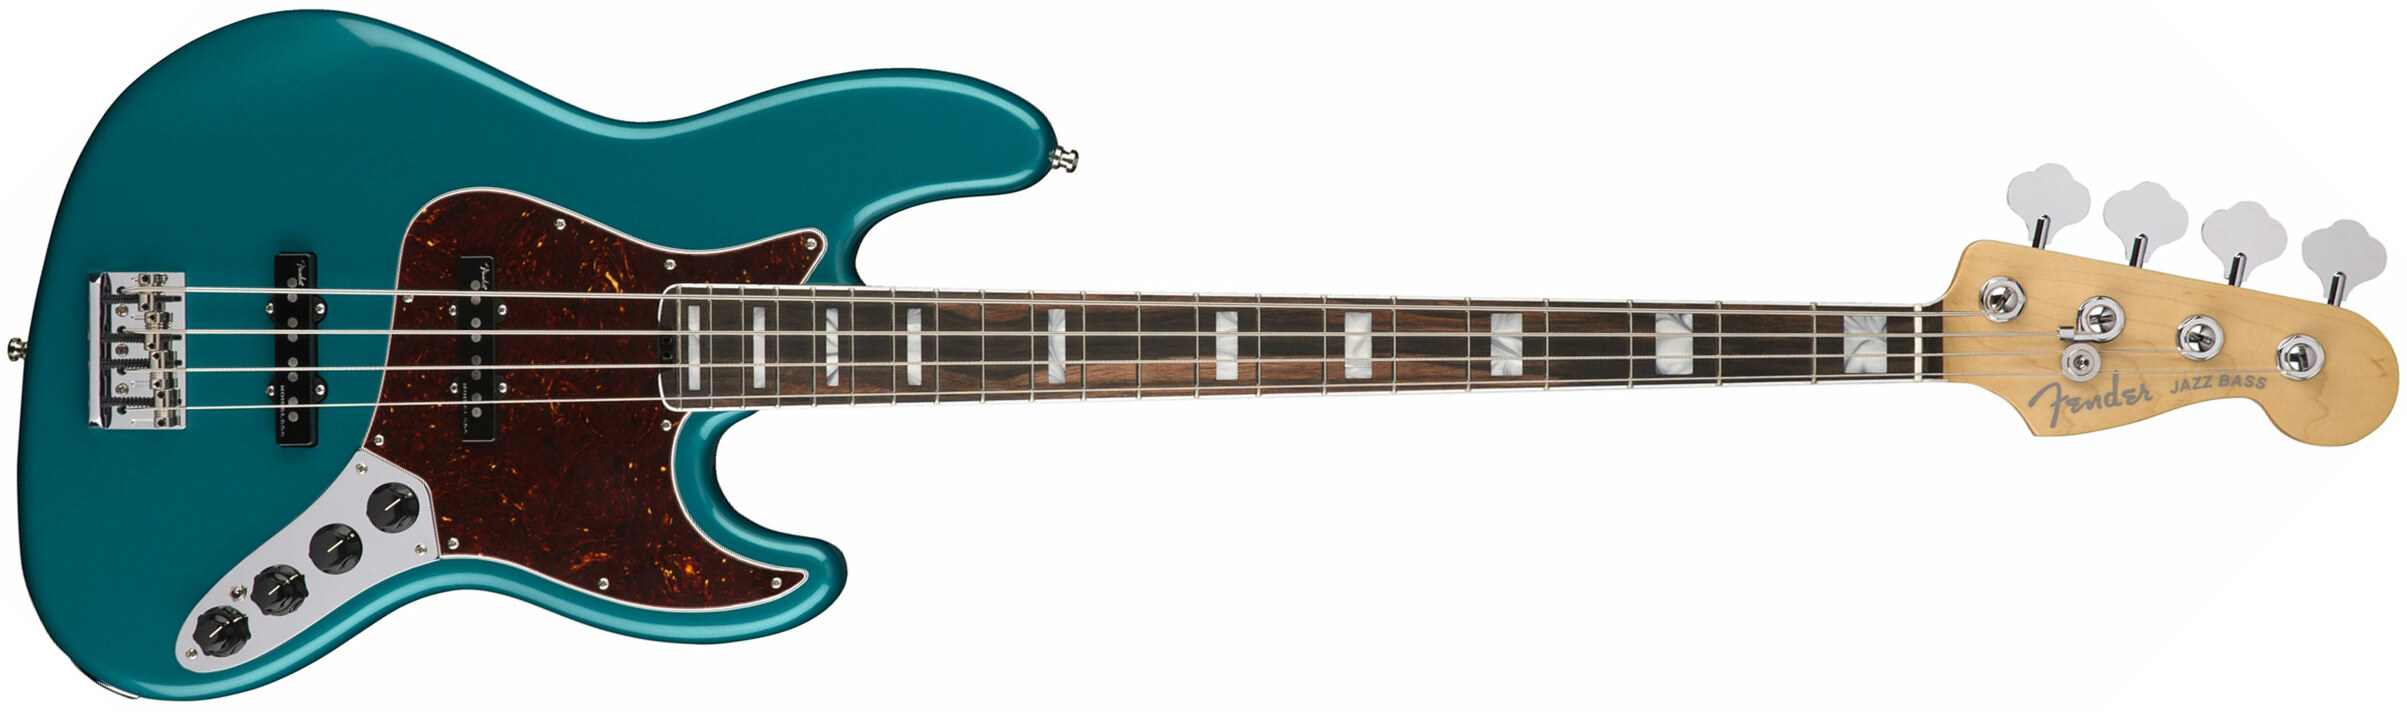 Fender American Elite Jazz Bass 2018 Usa Eb - Ocean Turquoise - Solid body electric bass - Main picture